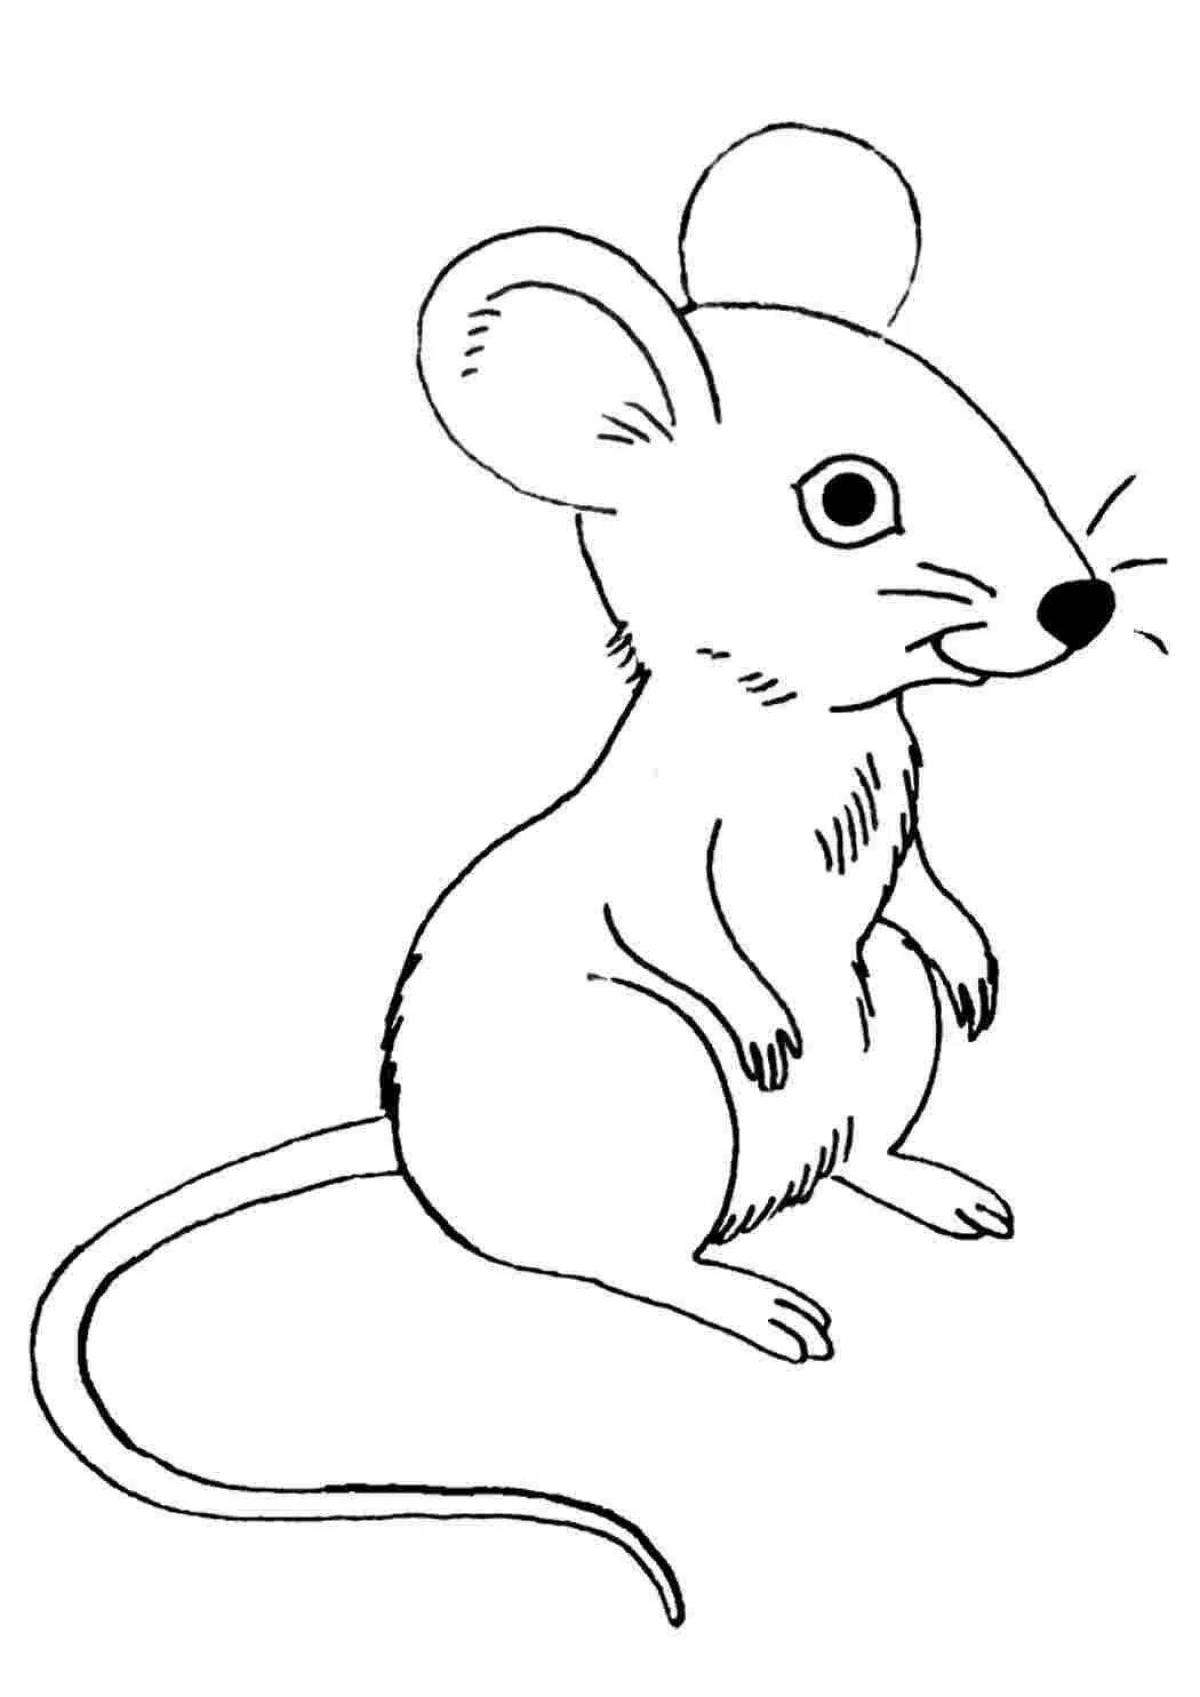 Unique coloring mouse for children 3-4 years old